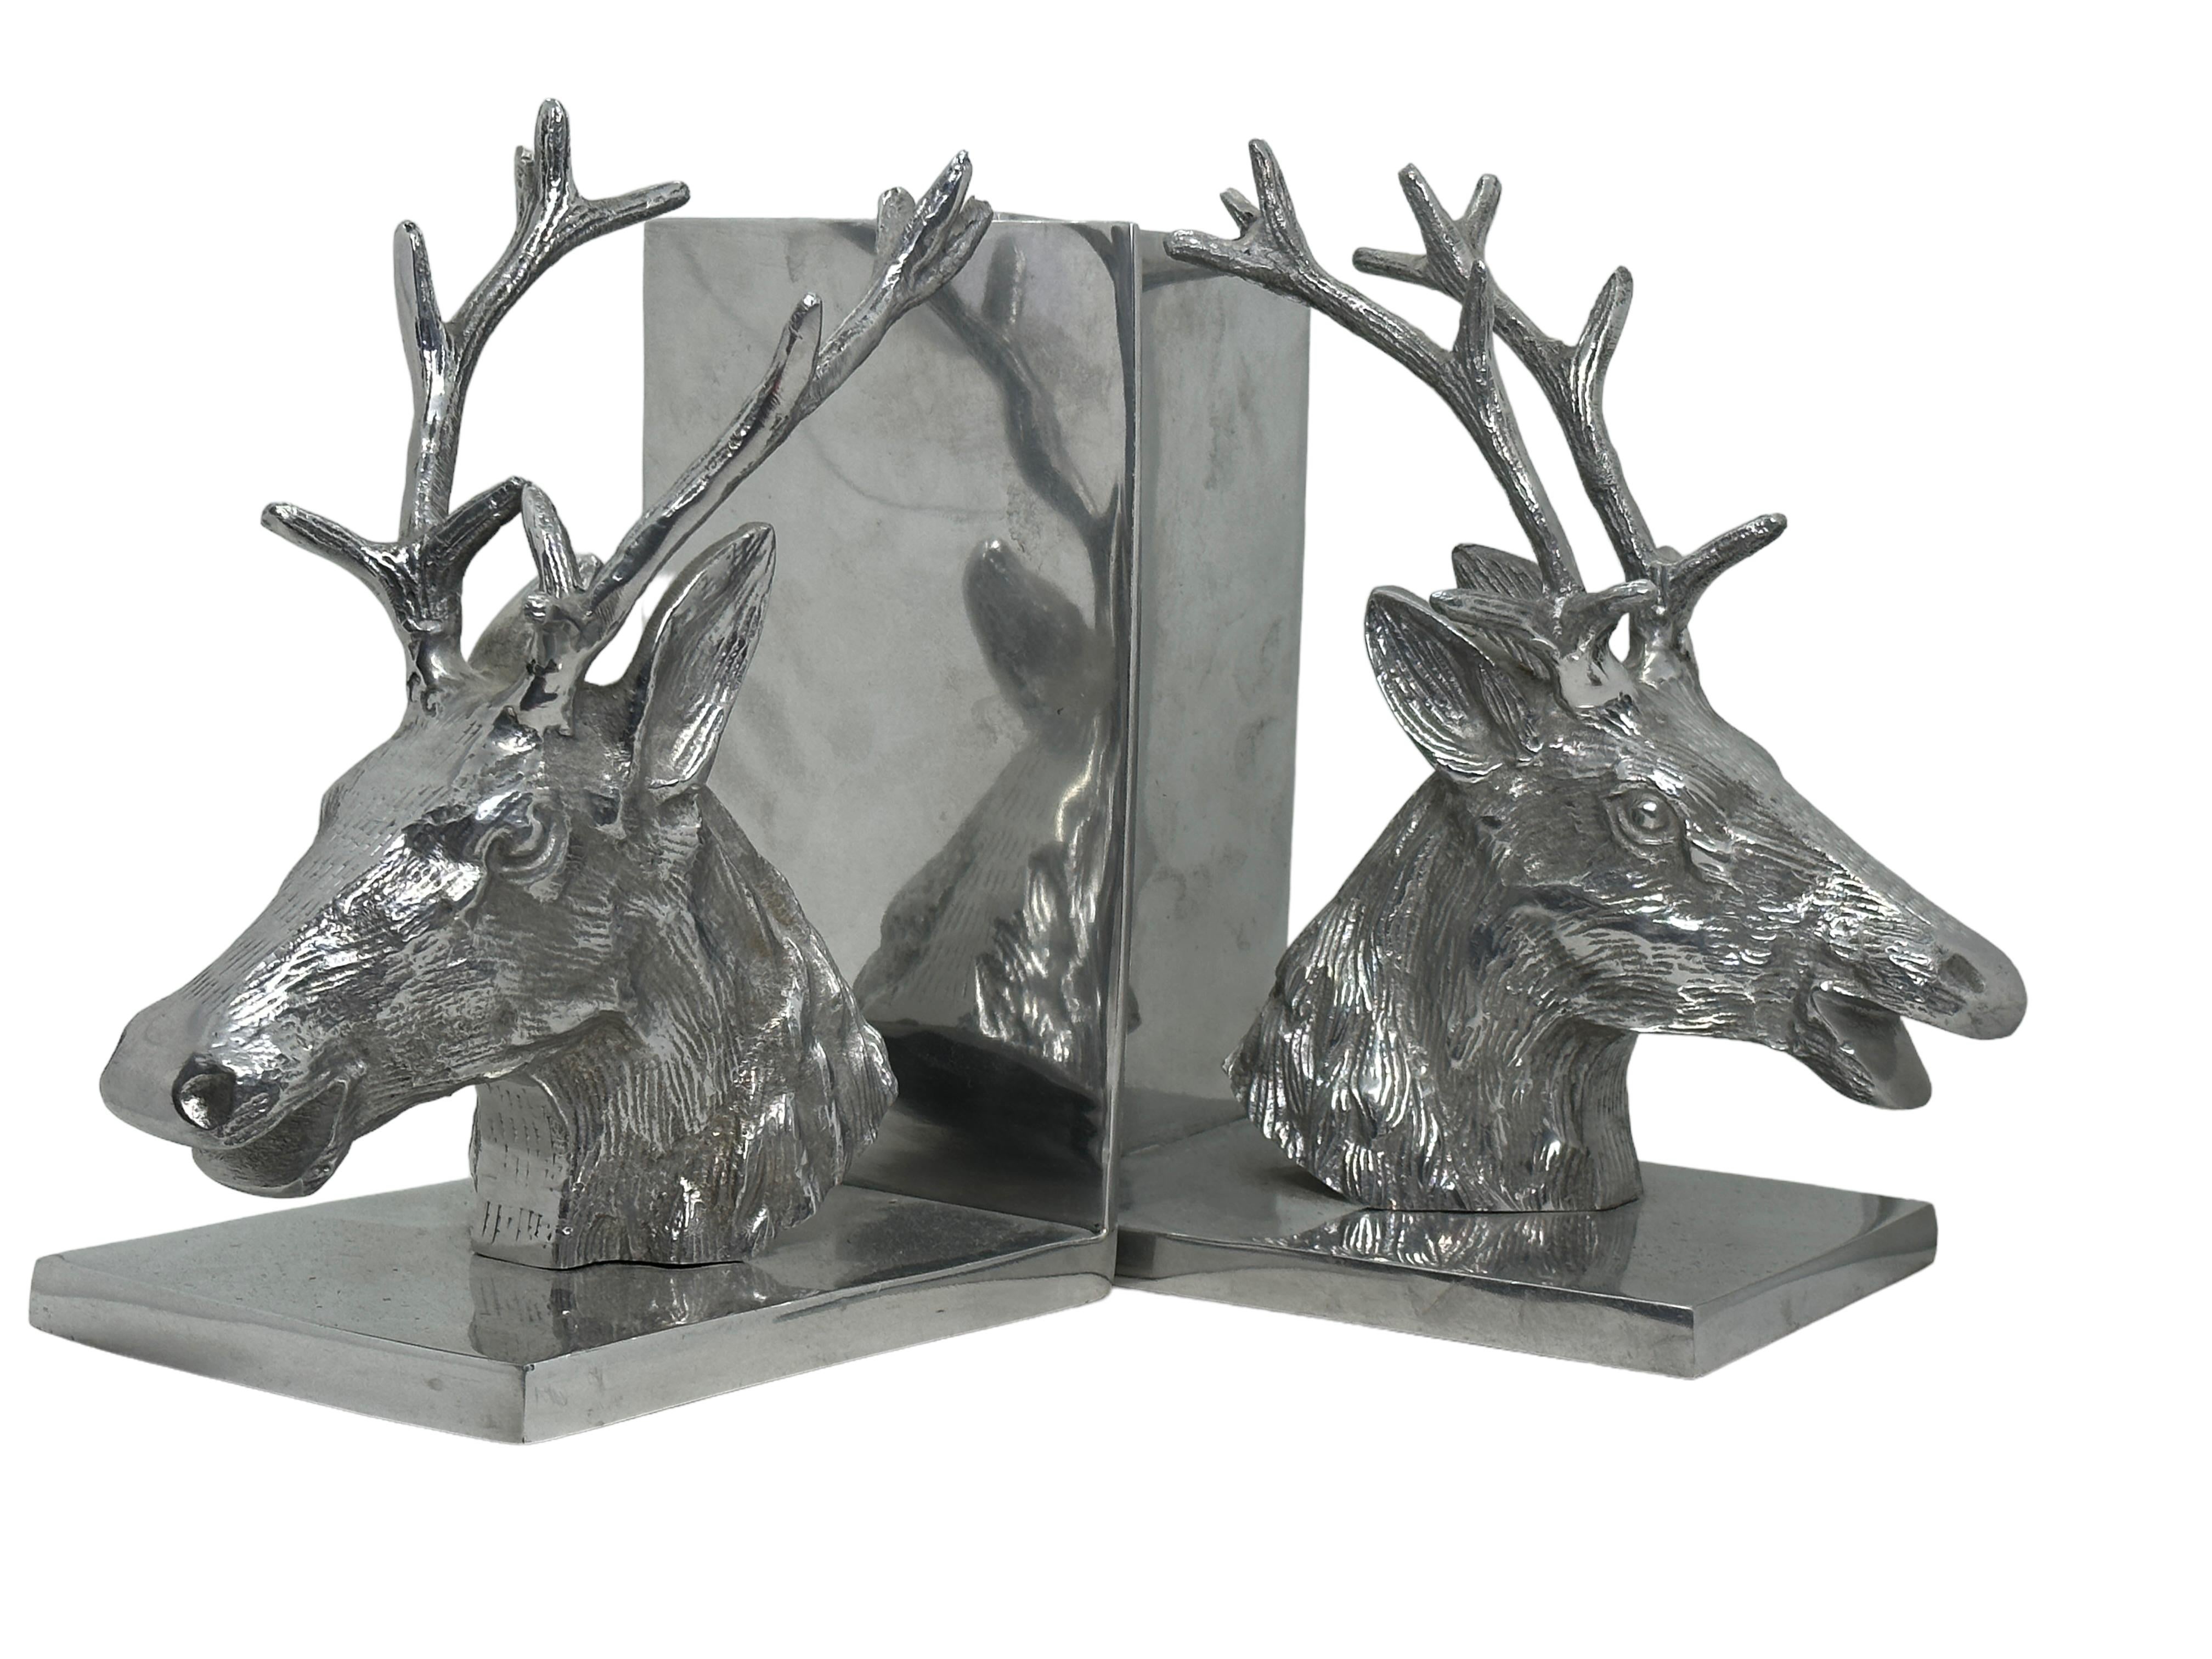 Pair of Vintage Polished Aluminum Deer Bookends, circa 1980s For Sale 1